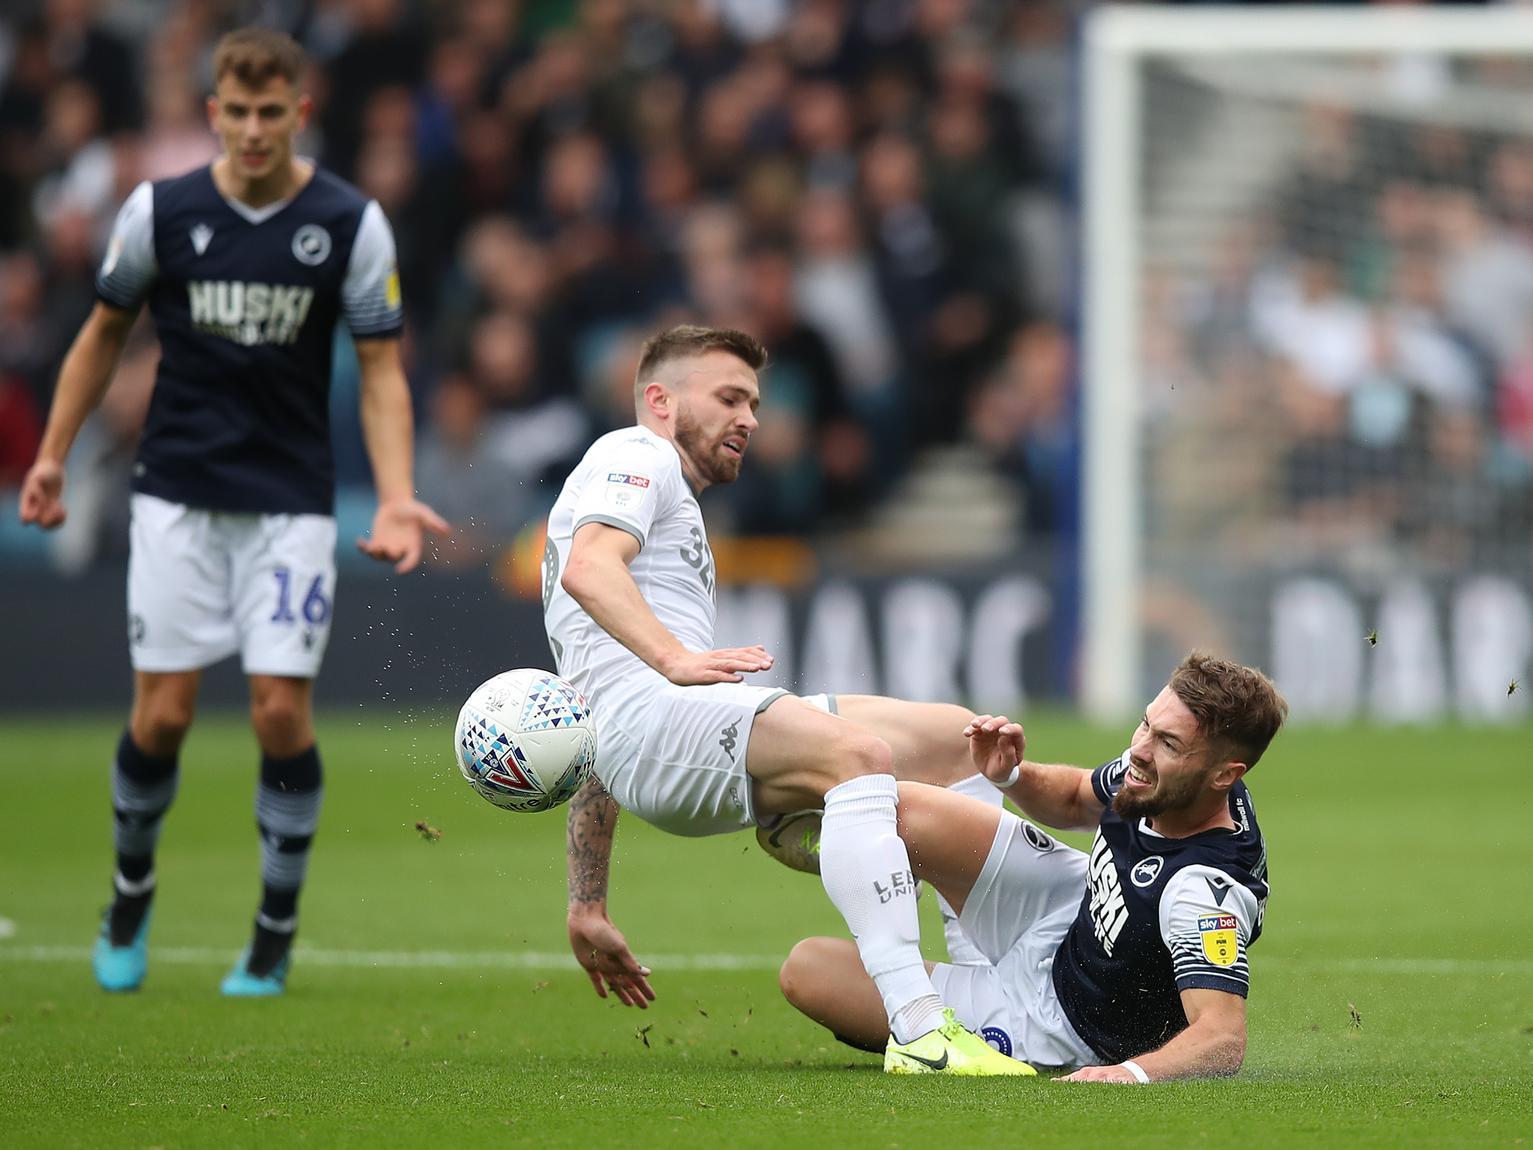 It feels harsh putting this performance so low down as Leeds were down to ten men due to a questionable red card for Gaetano Berardi within minutes. The red card was later overturned, but that was no use for Leeds, who shipped two goals in the first half.